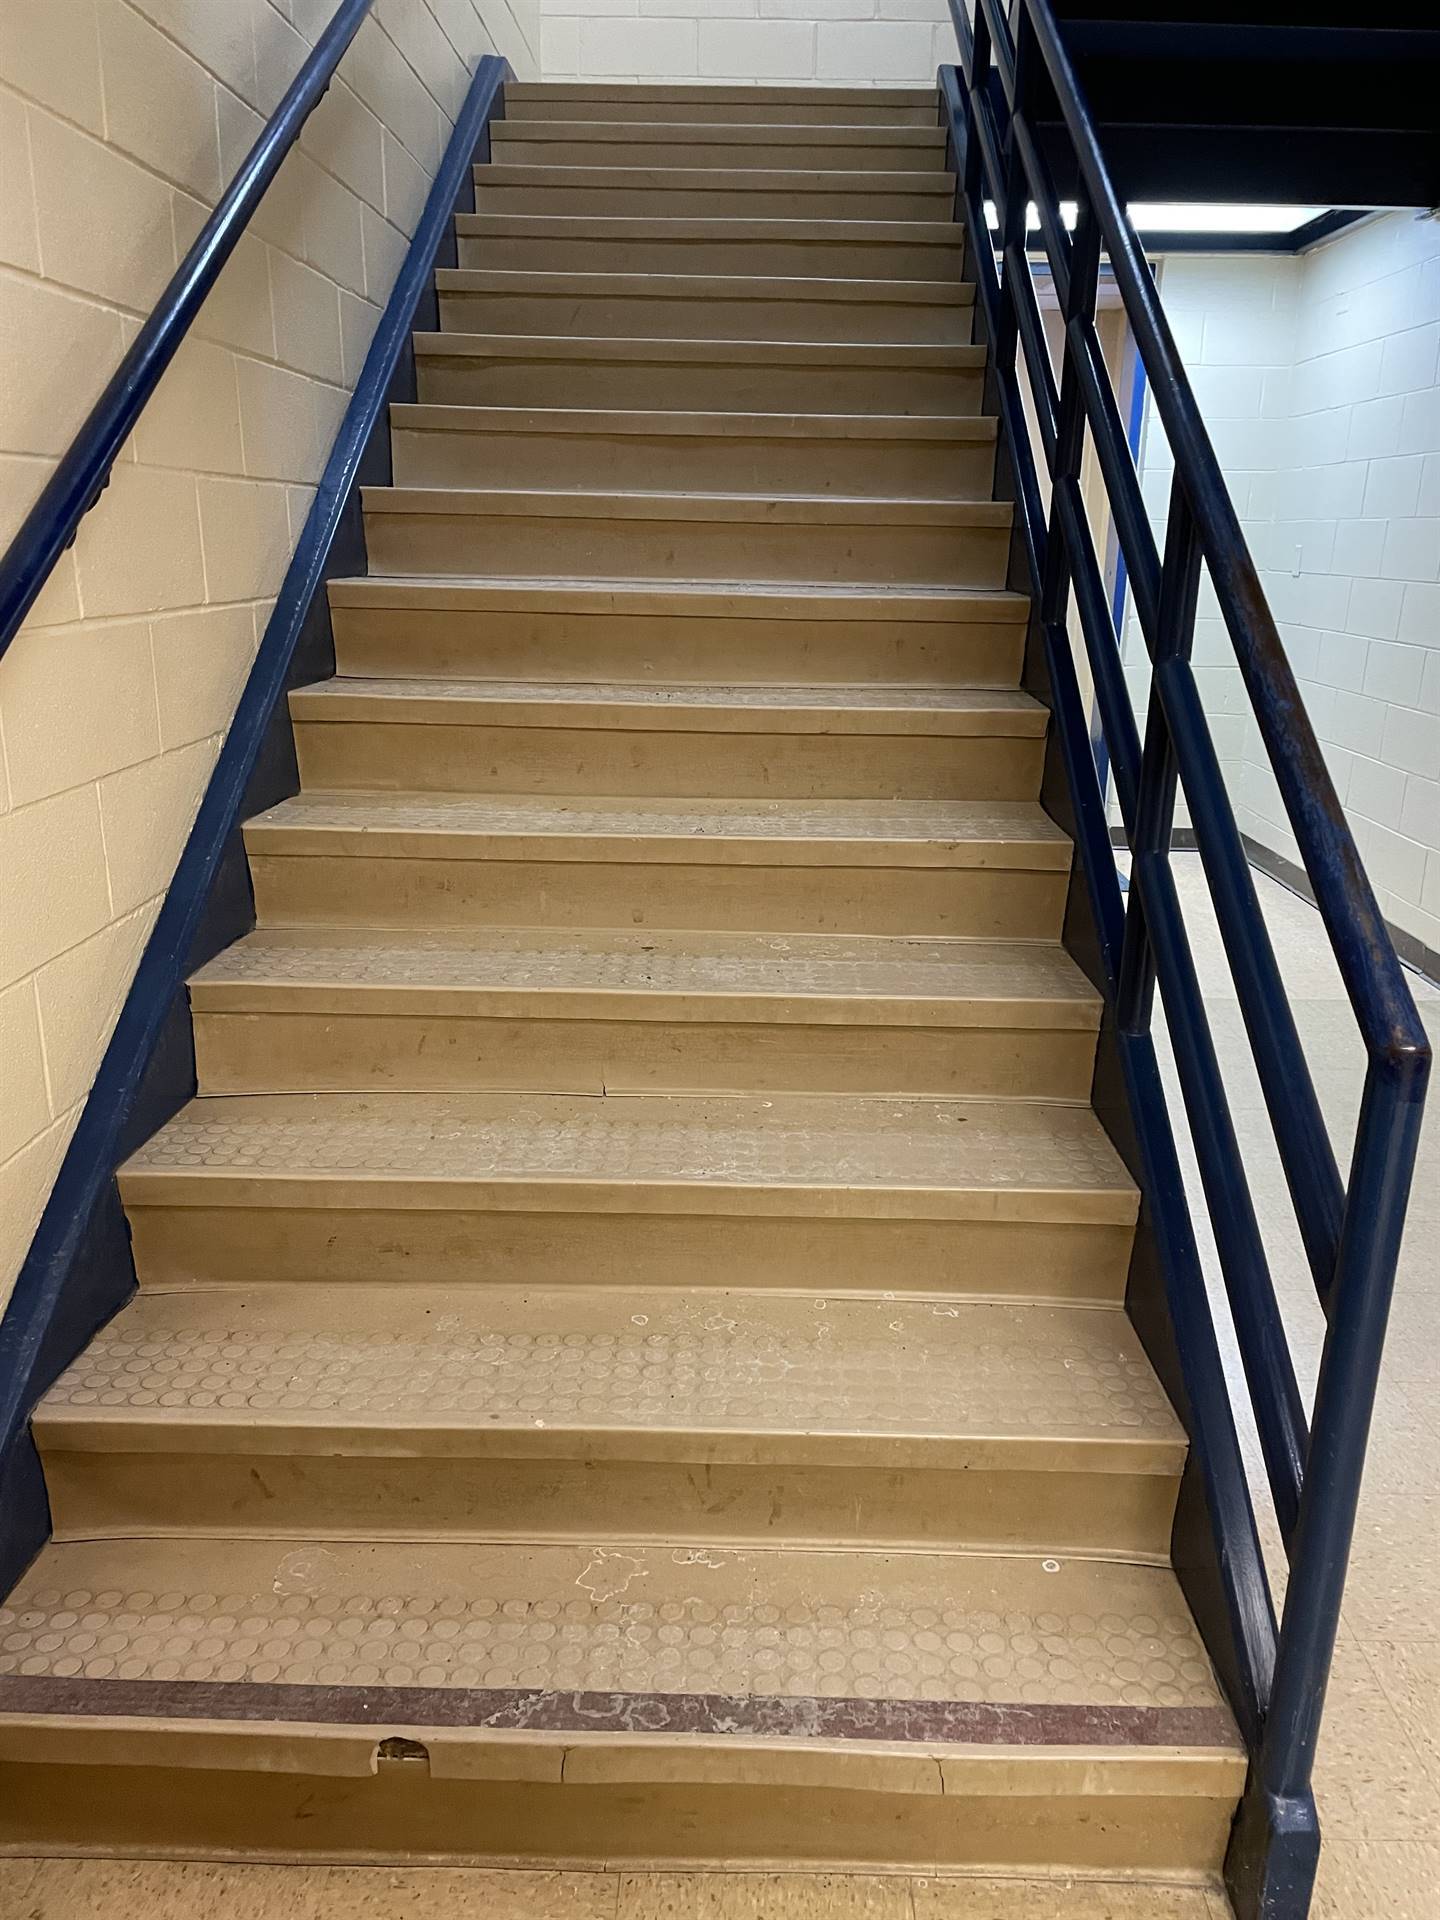 Secondary Stairs - near Guidance exit doors